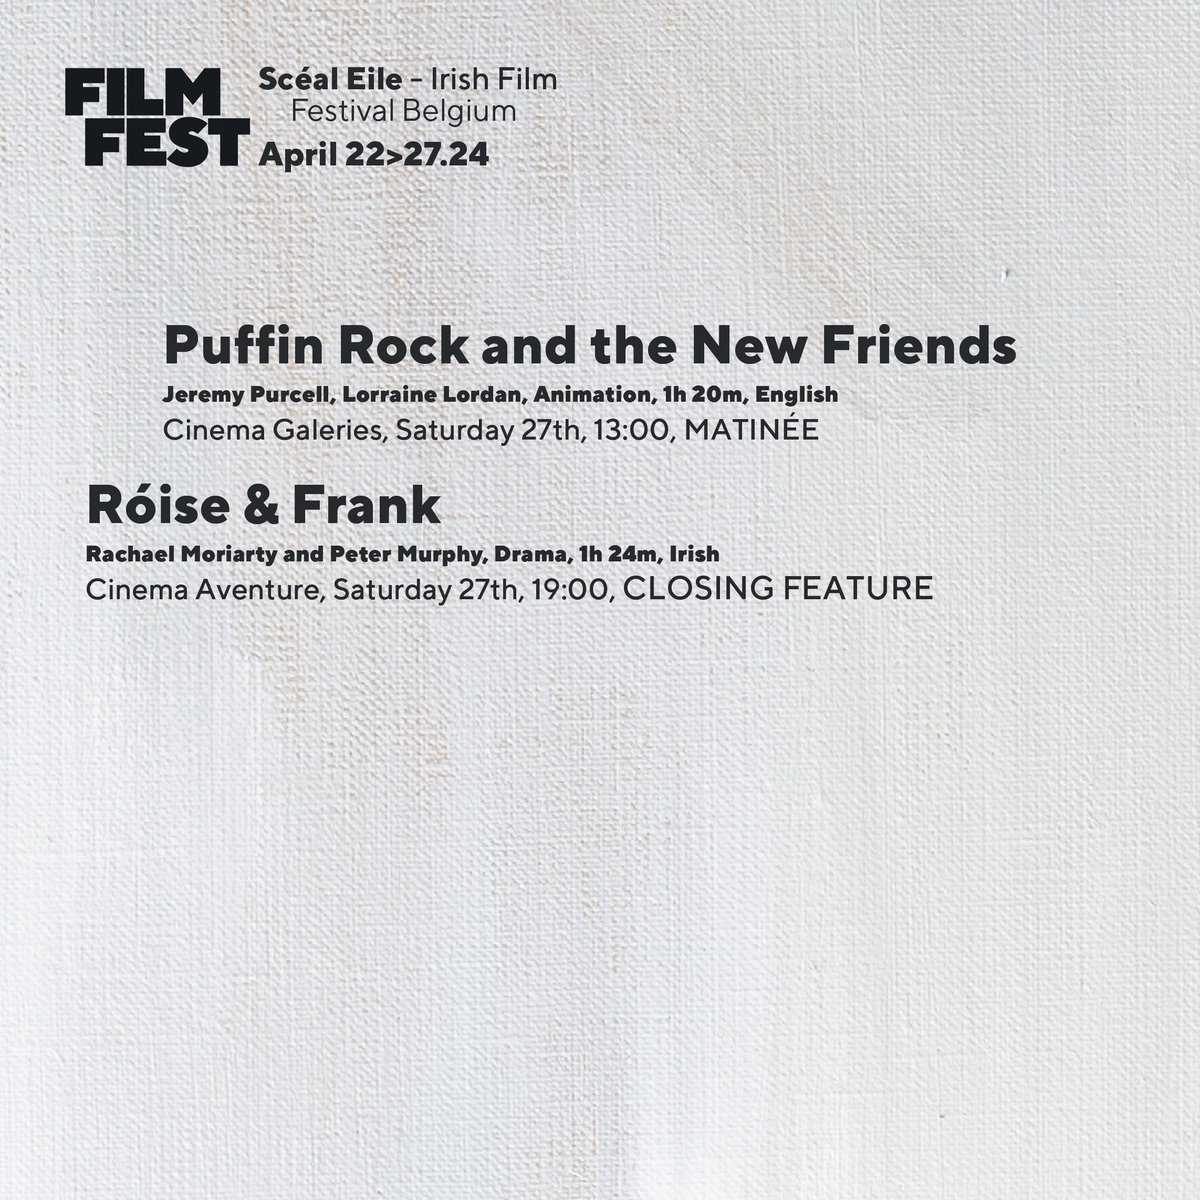 Today: Our first ever children’s matinee and last festival feature. 1pm - Puffin Rock and the New Friends, Cinema Galeries 7pm - Róise & Frank, Cinema Aventure Join us for either or both! You won’t be disappointed. #bestofirishfilm